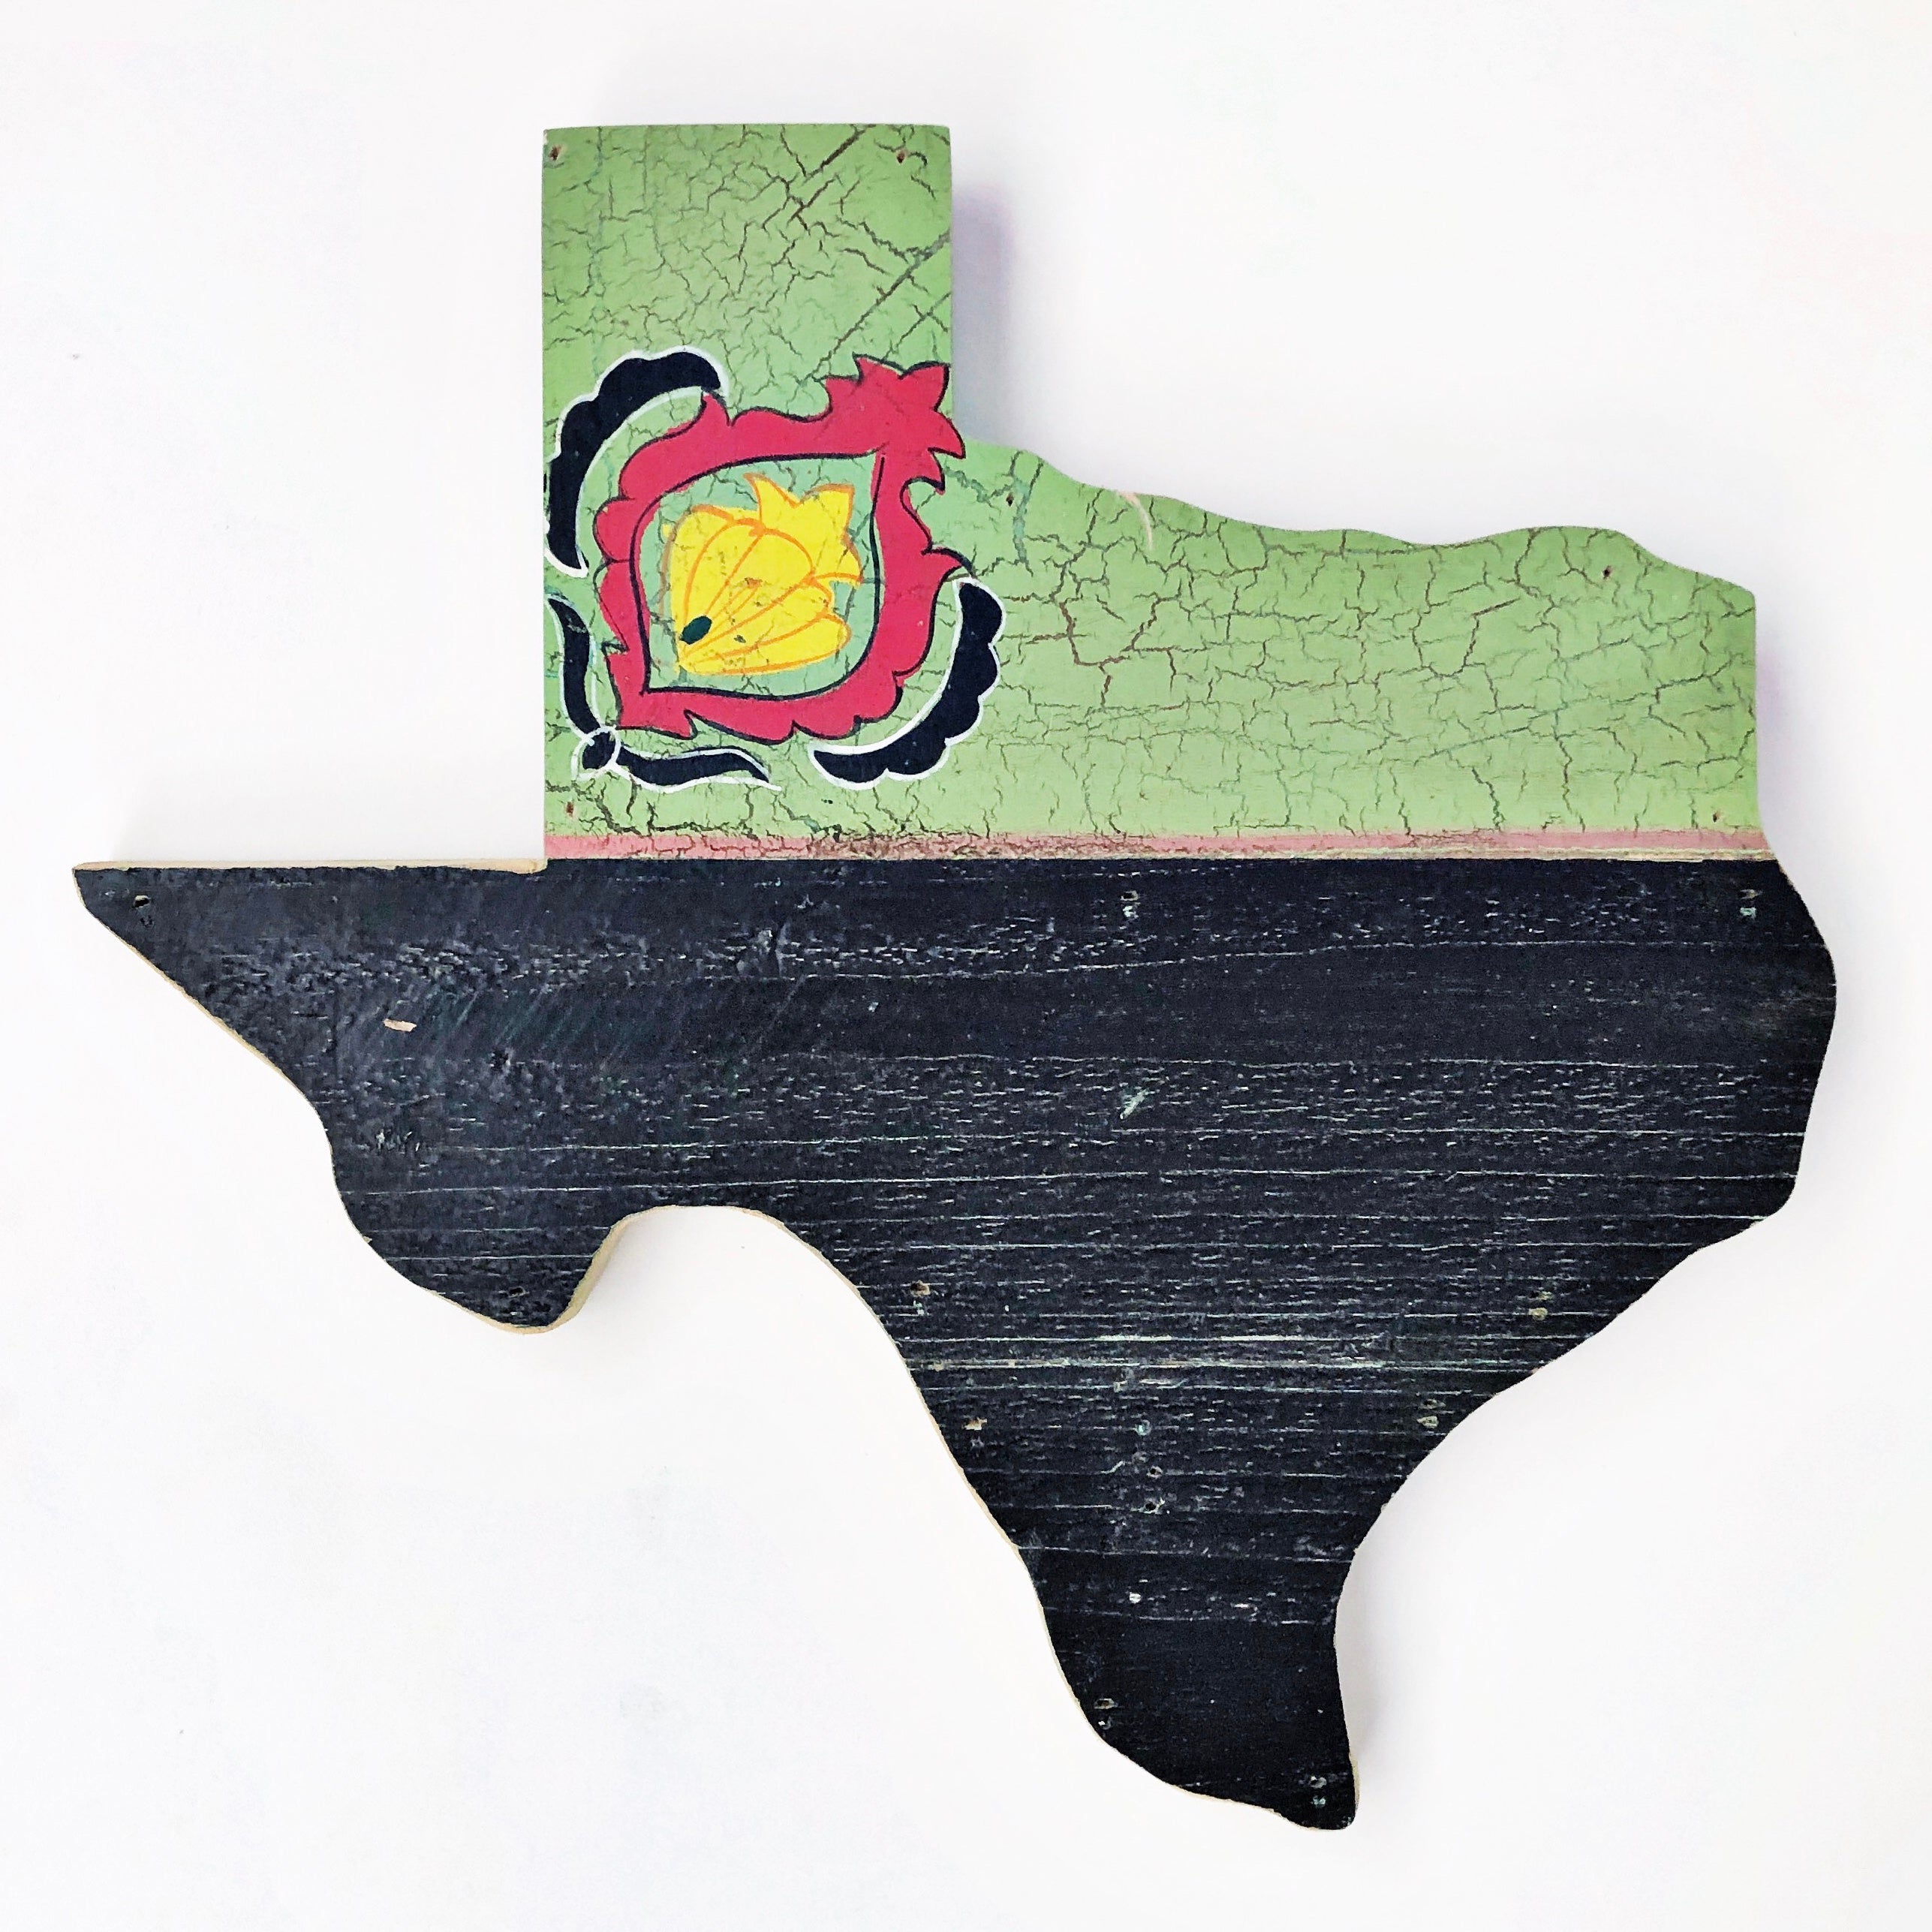 VINTAGE TEXAS - 12" (One-of-a-Kind)